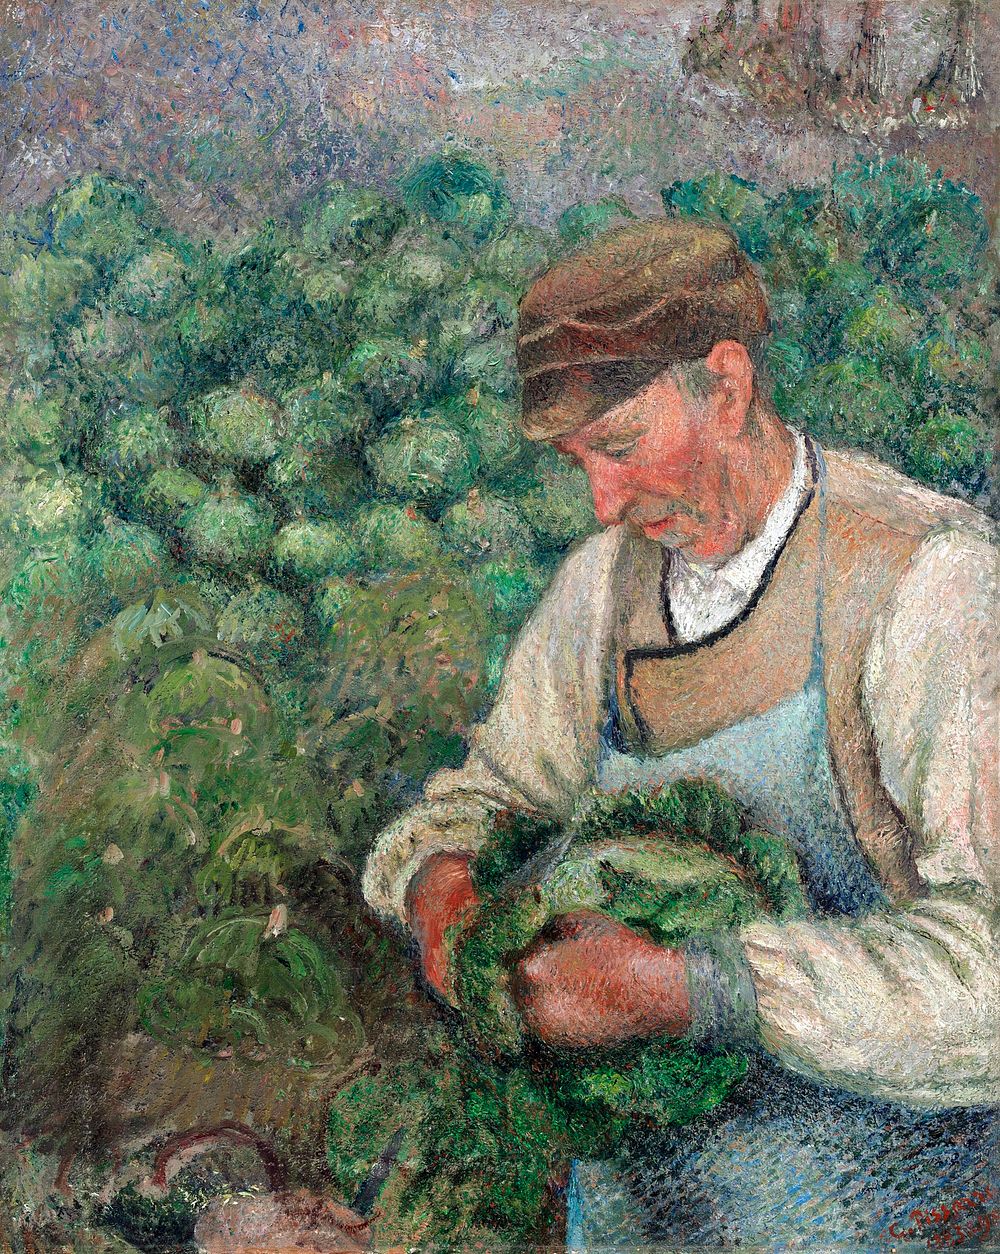 The Gardener - Old Peasant with Cabbage (1883-1895) by Camille Pissarro. Original from The National Gallery of Art.…